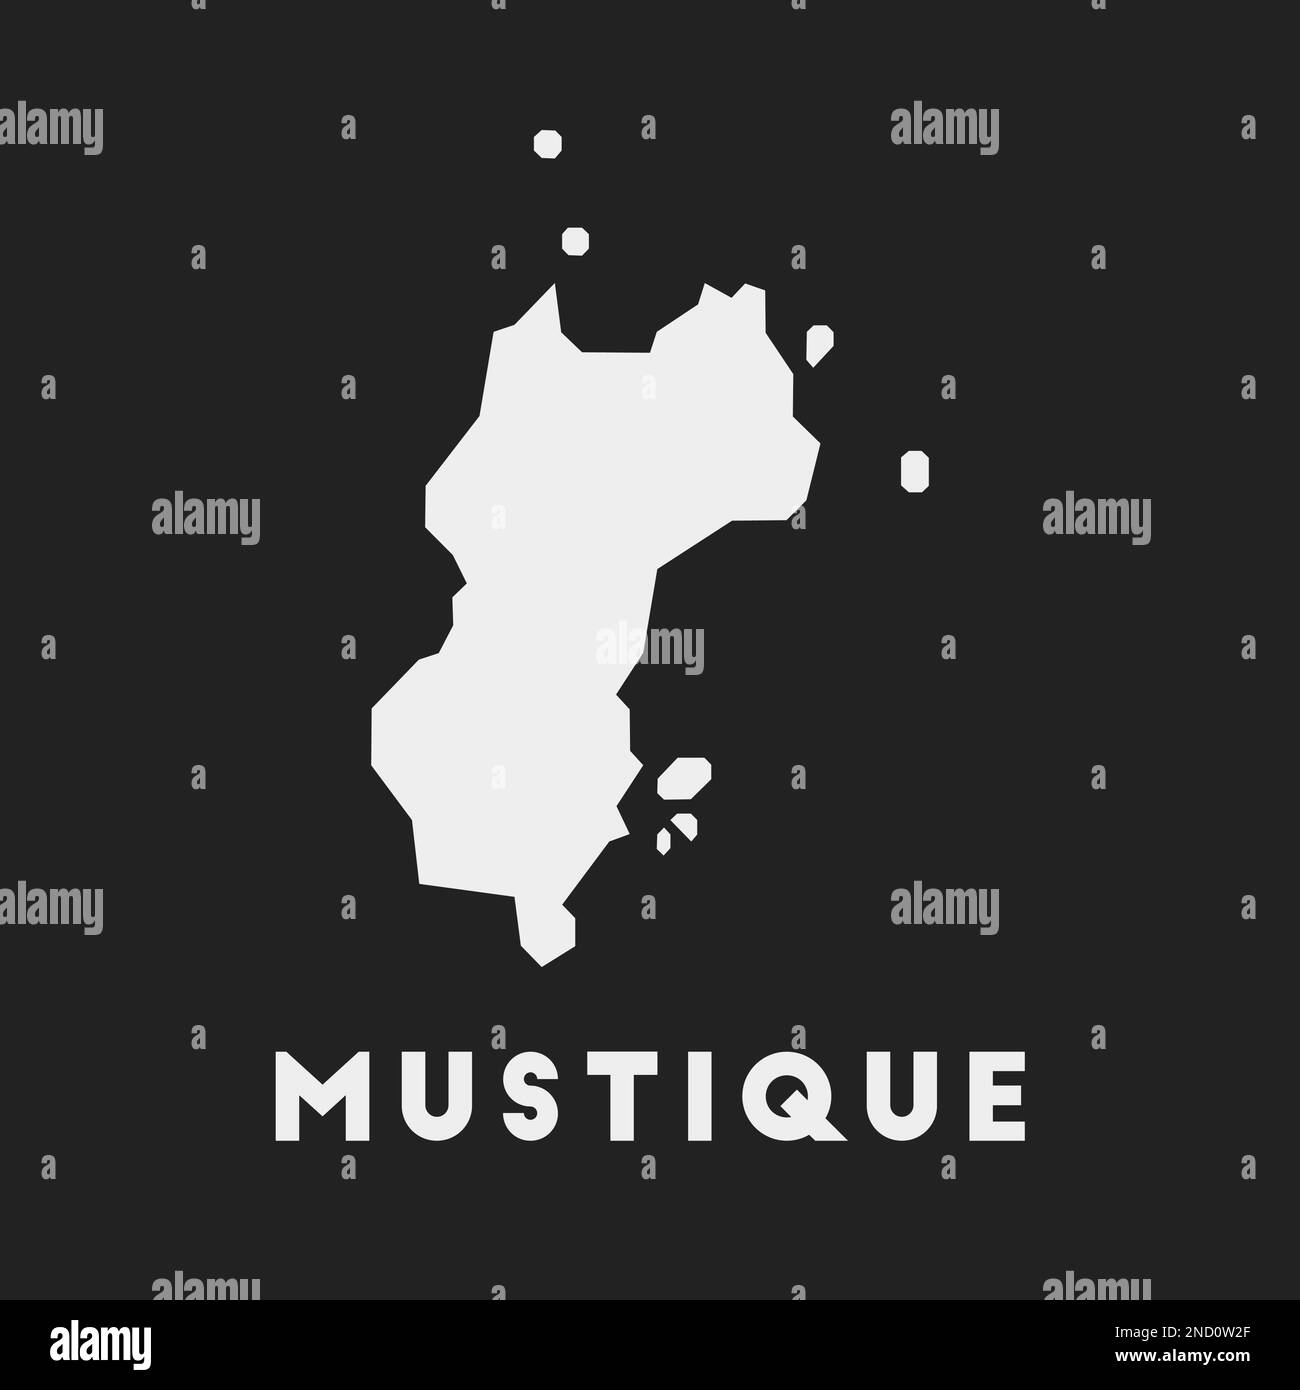 Mustique icon. Island map on dark background. Stylish Mustique map with ...